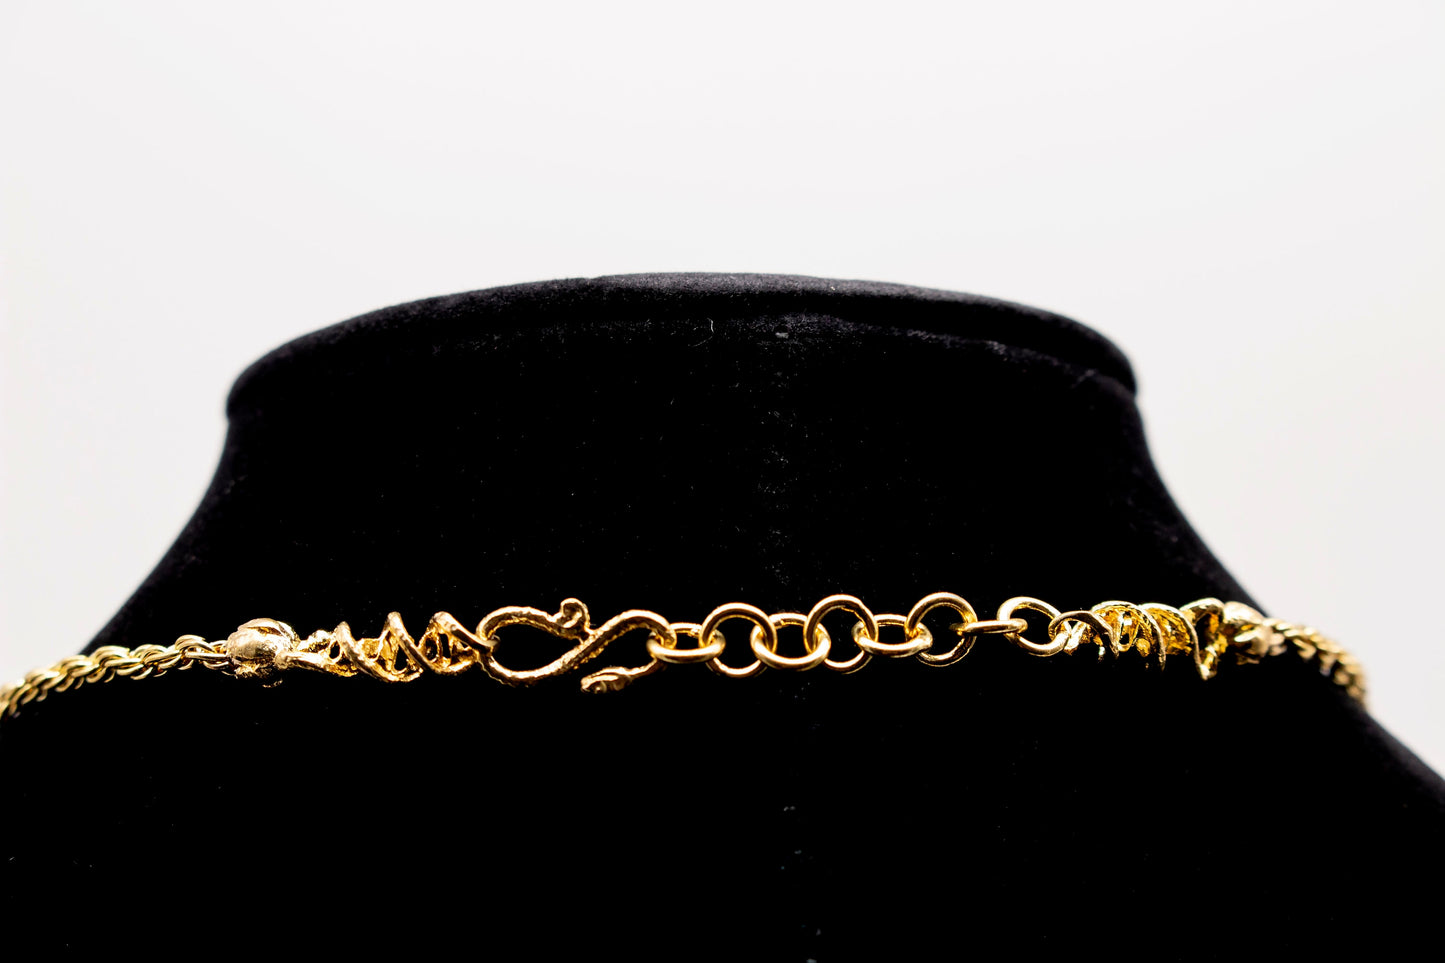 Adjustable Hand-Braided Chain with Cobra Clasp - Brass